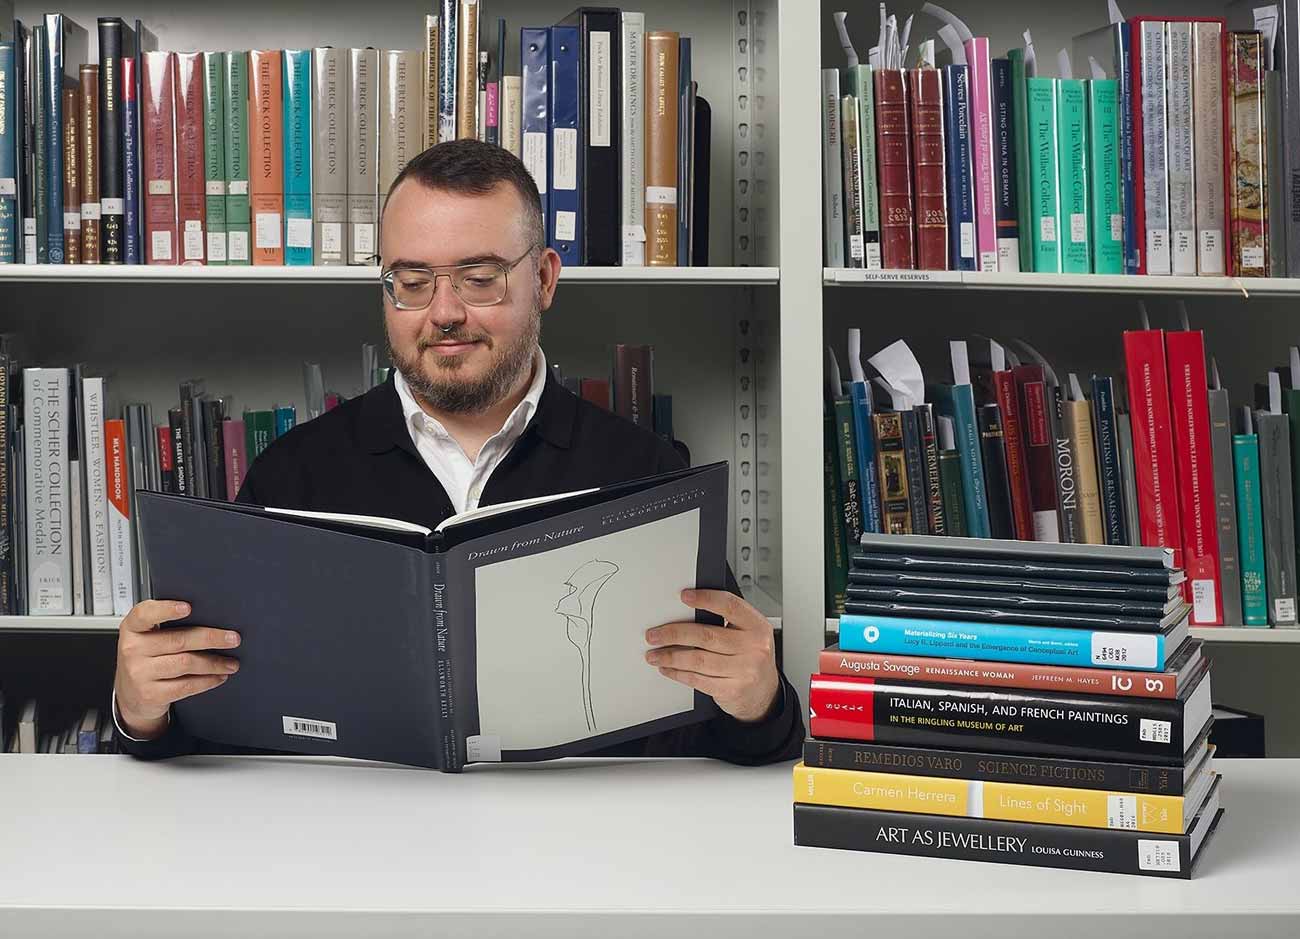 Man in a library flipping through a book at a desk stacked with 10 other books